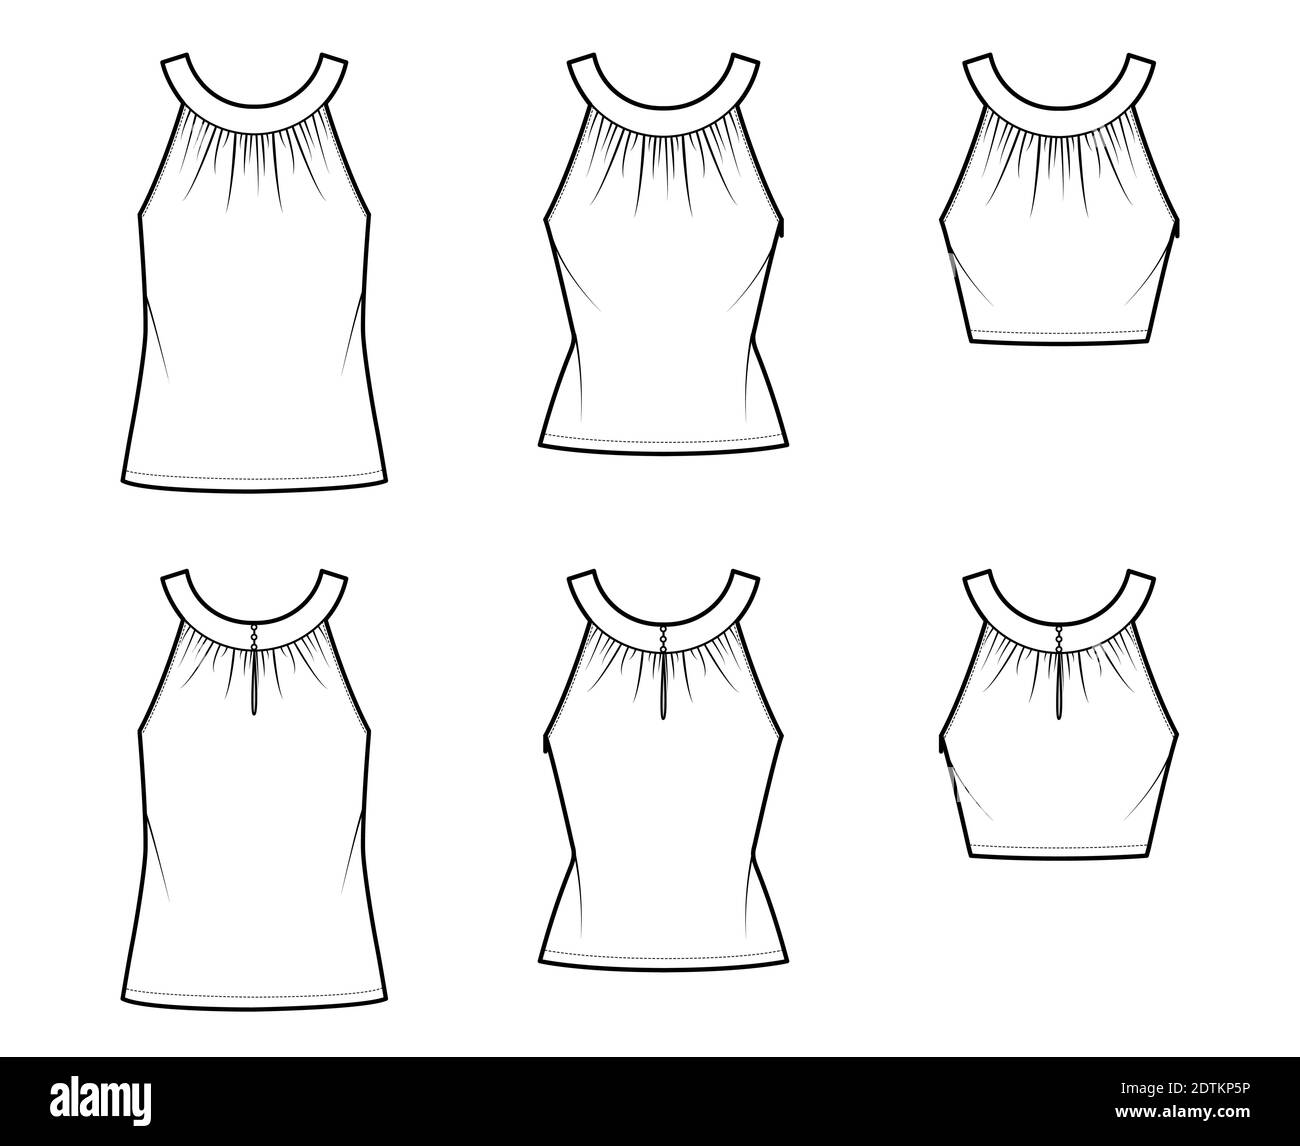 Set of Tops rounded neck band tank technical fashion illustration with ruching, fitted and oversized body, tunic and waist length hem. Flat template front, back, white color. Women, men CAD mockup Stock Vector